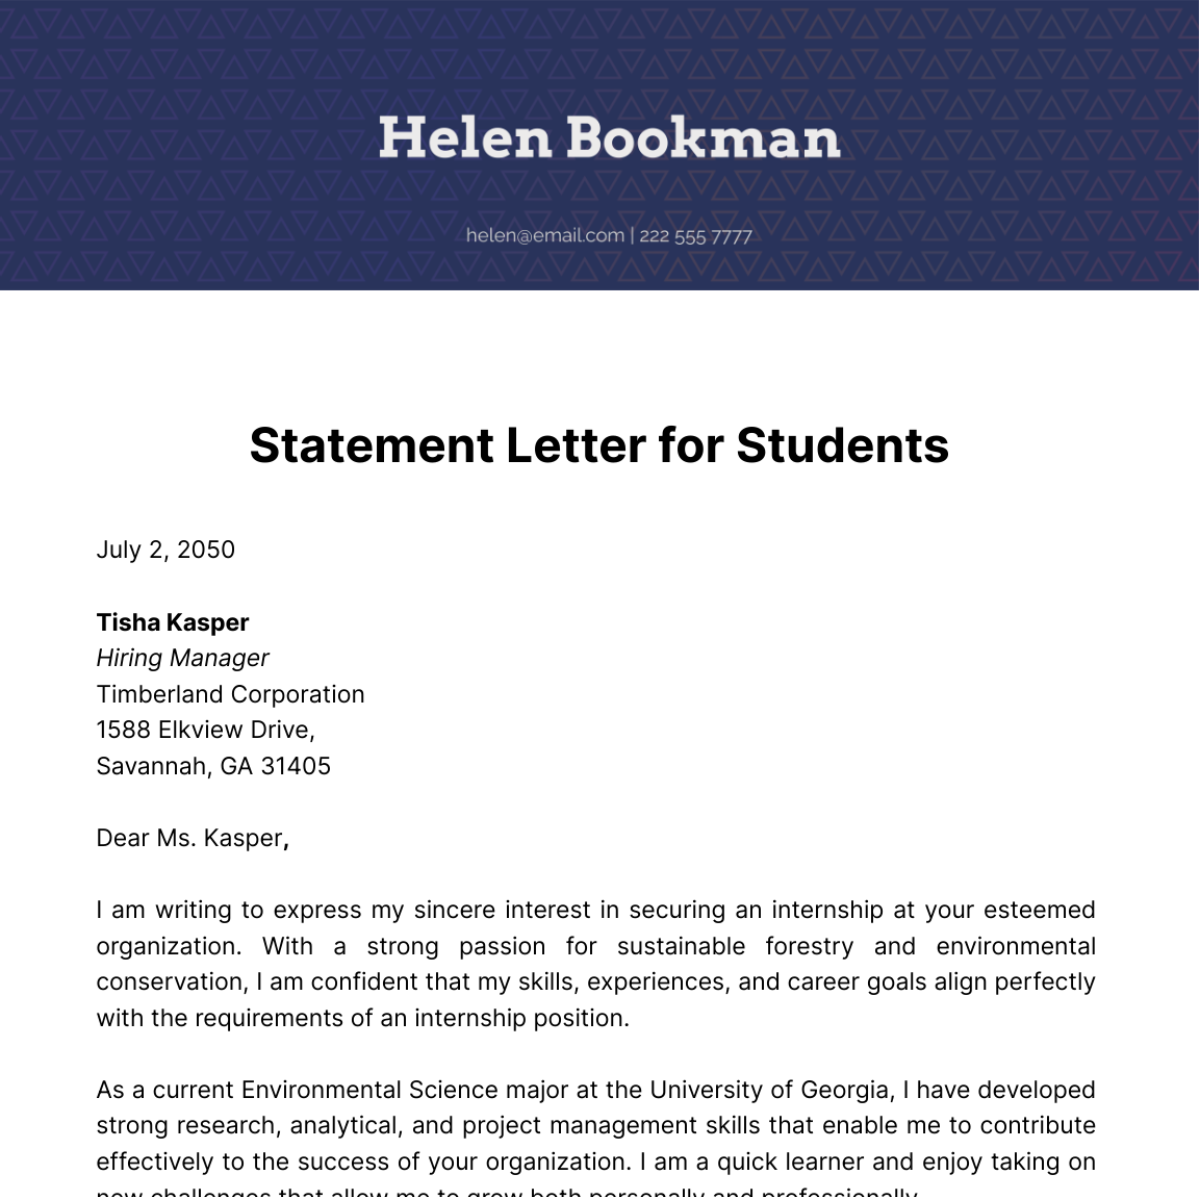 Free Statement Letter for Students Template